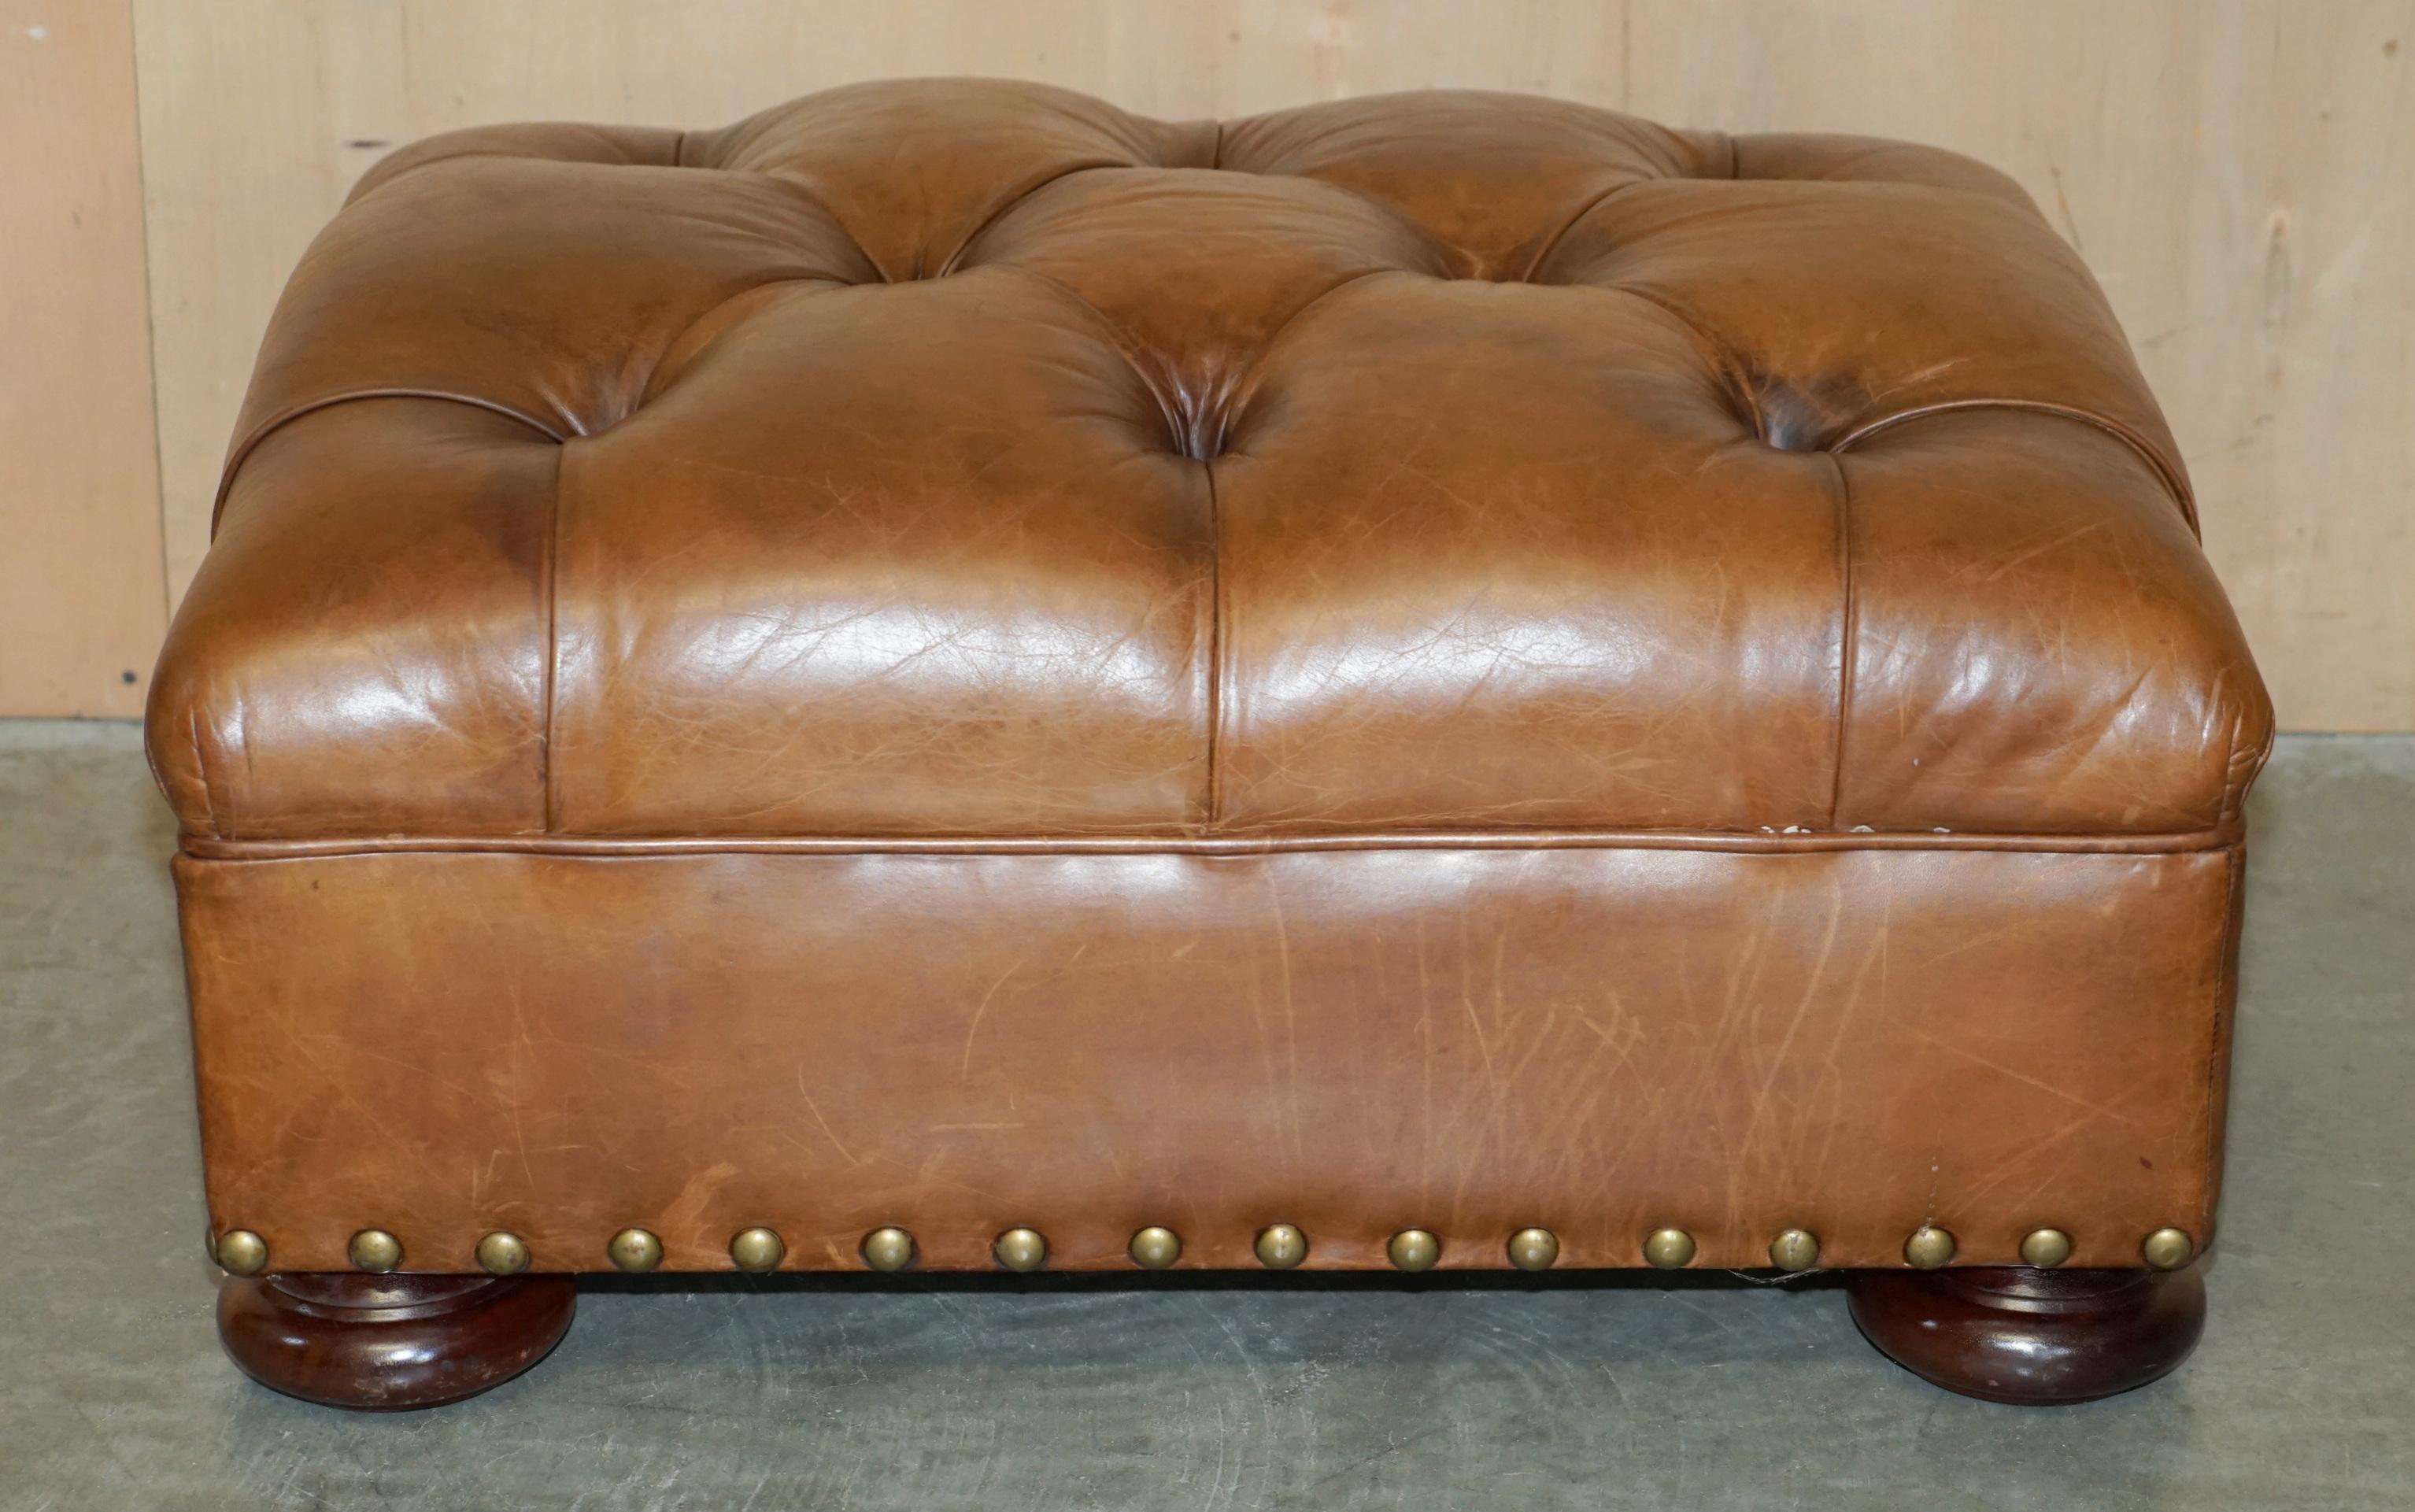 RALPH LAUREN WRITER'S CHESTERFIELD FOOTSTOOL OTTOMAN IN HERiTAGE BROWN LEATHER 9